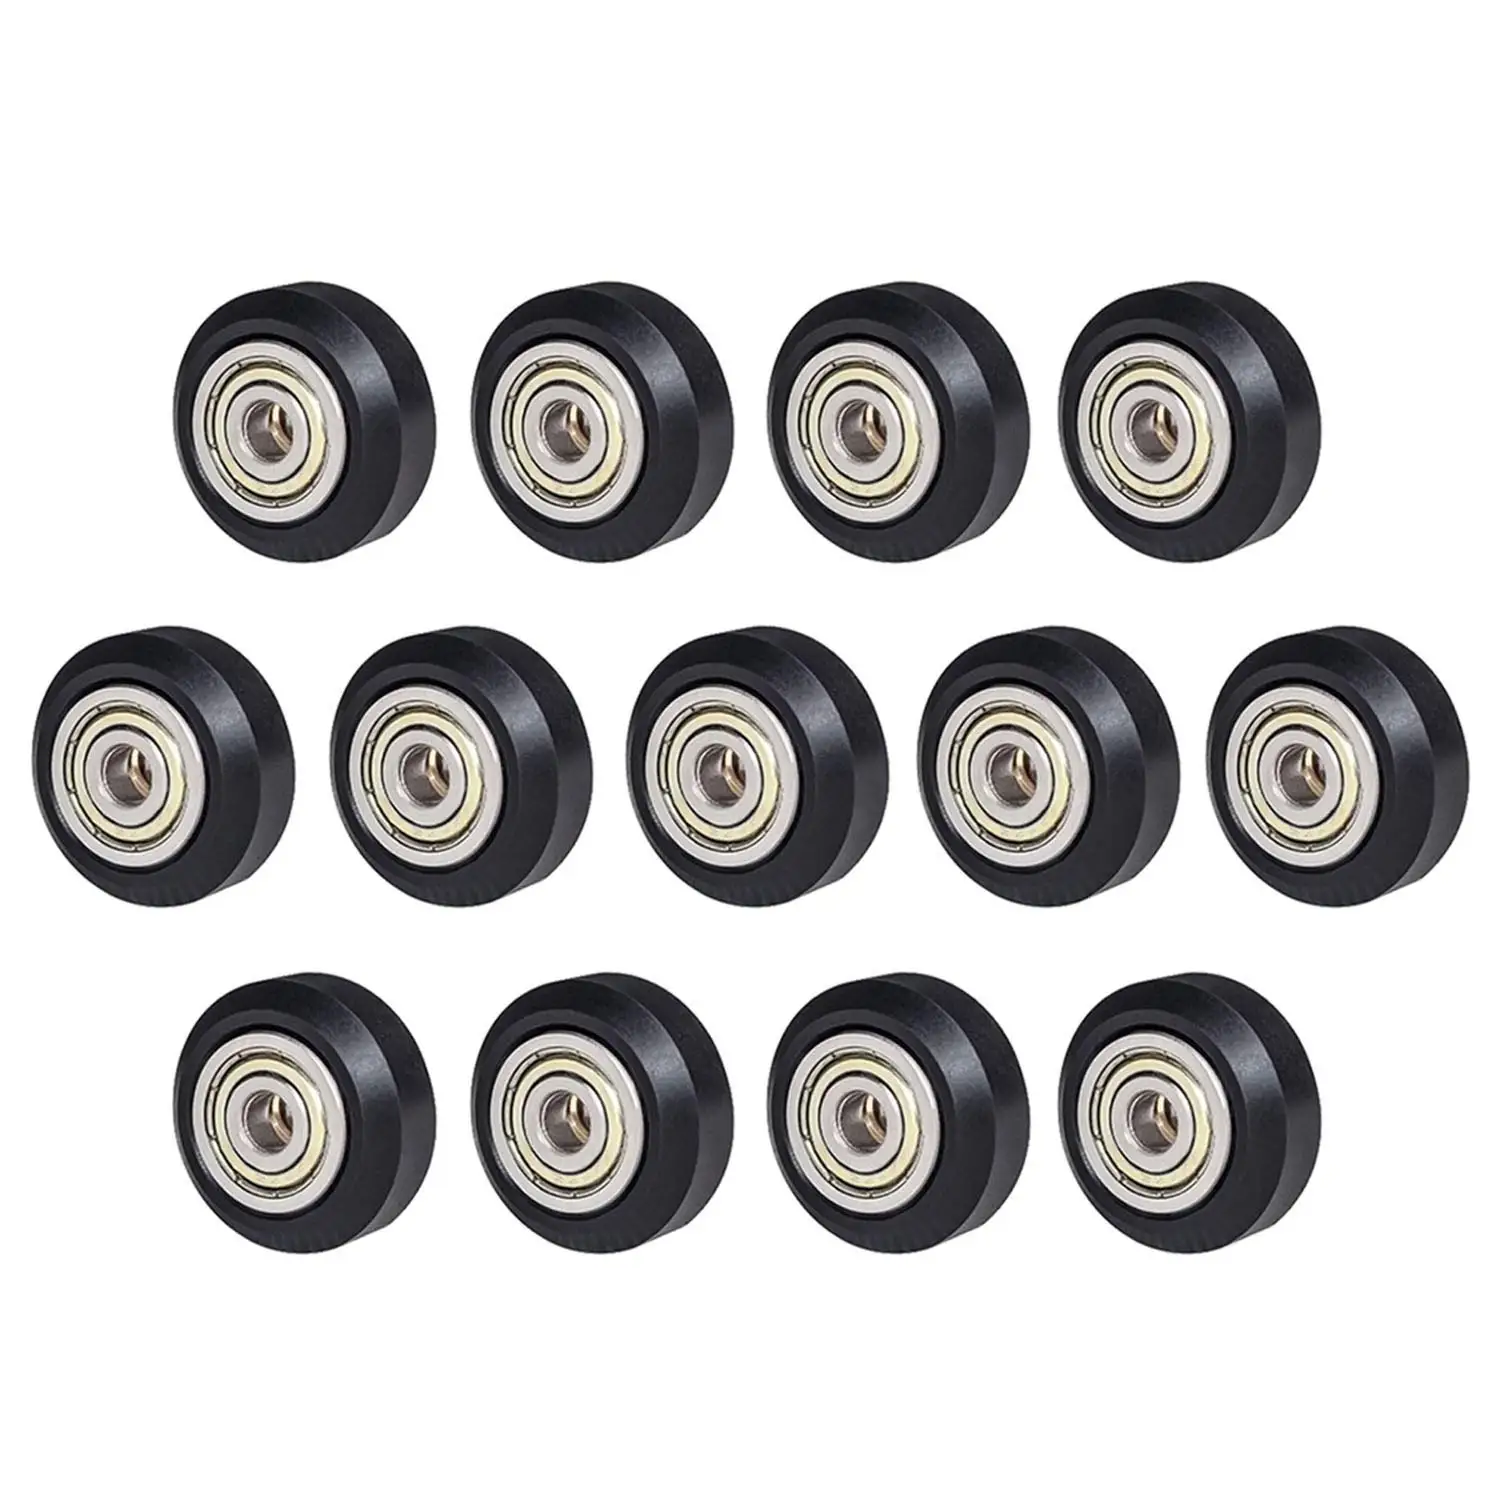 

[13Pcs/Pack]3D Printer POM Pulley Wheels 625Zz Linear Bearing Ulley Passive Round Wheel Roller for Creality CR10,Ender 3